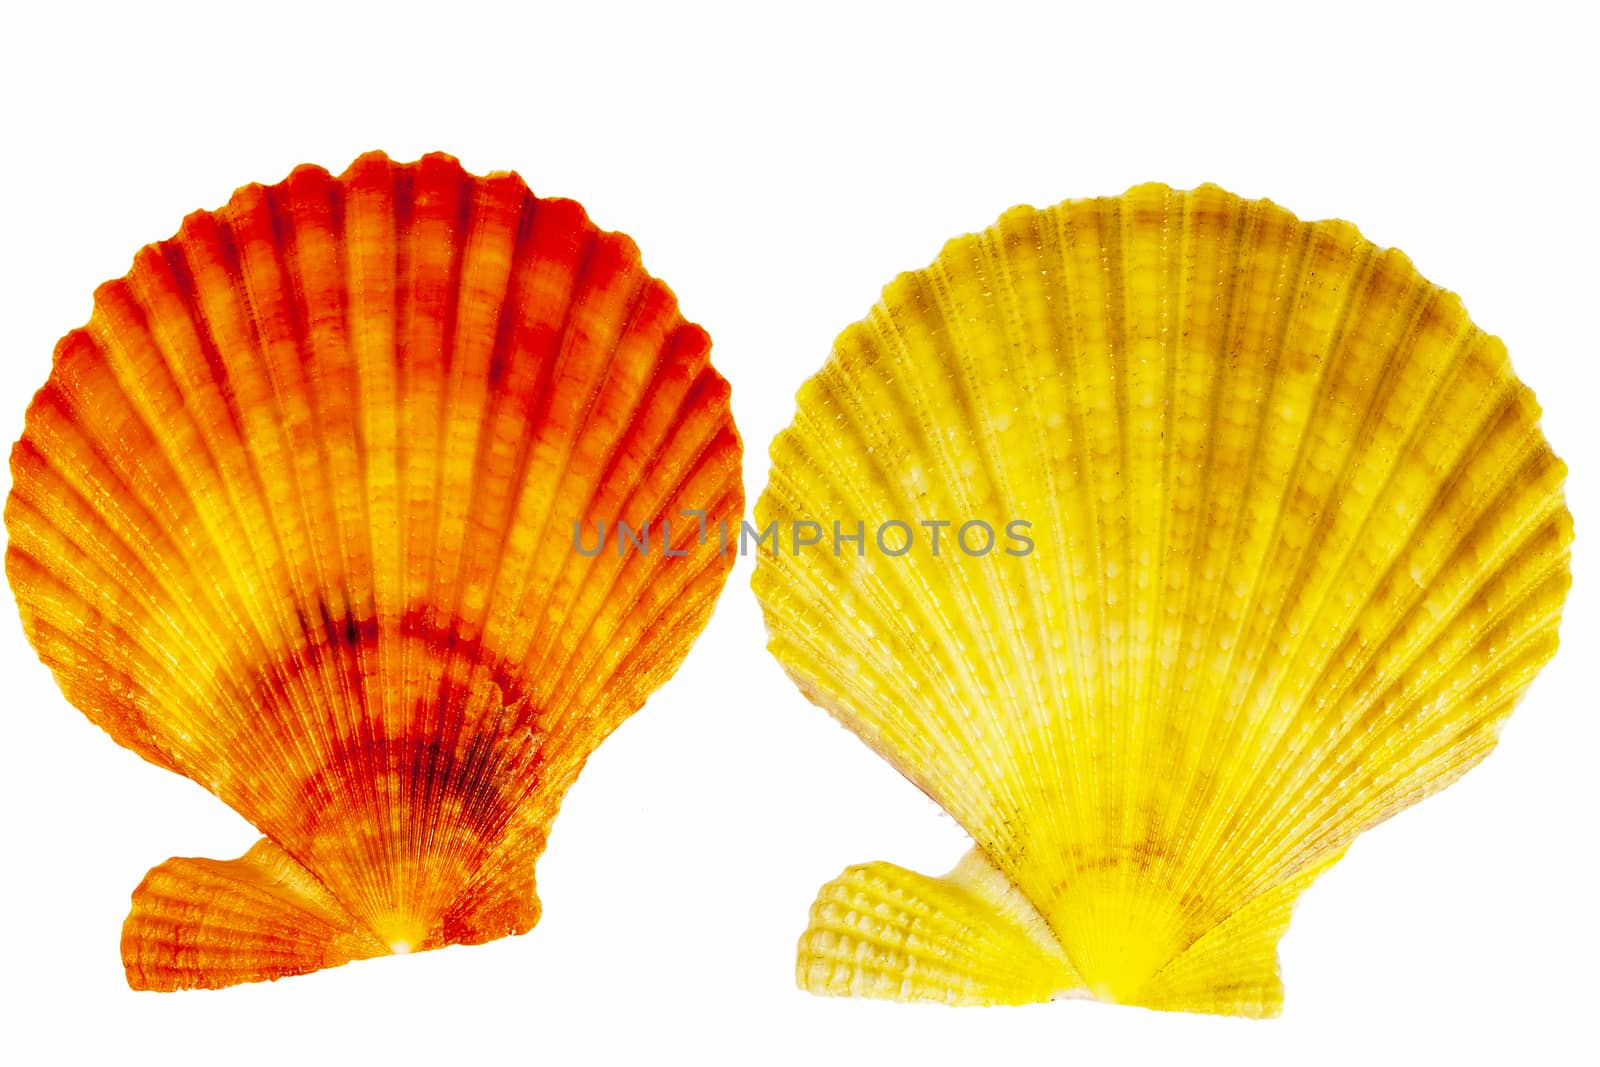  Colorful sea shells of mollusk isolated on white  background by mychadre77